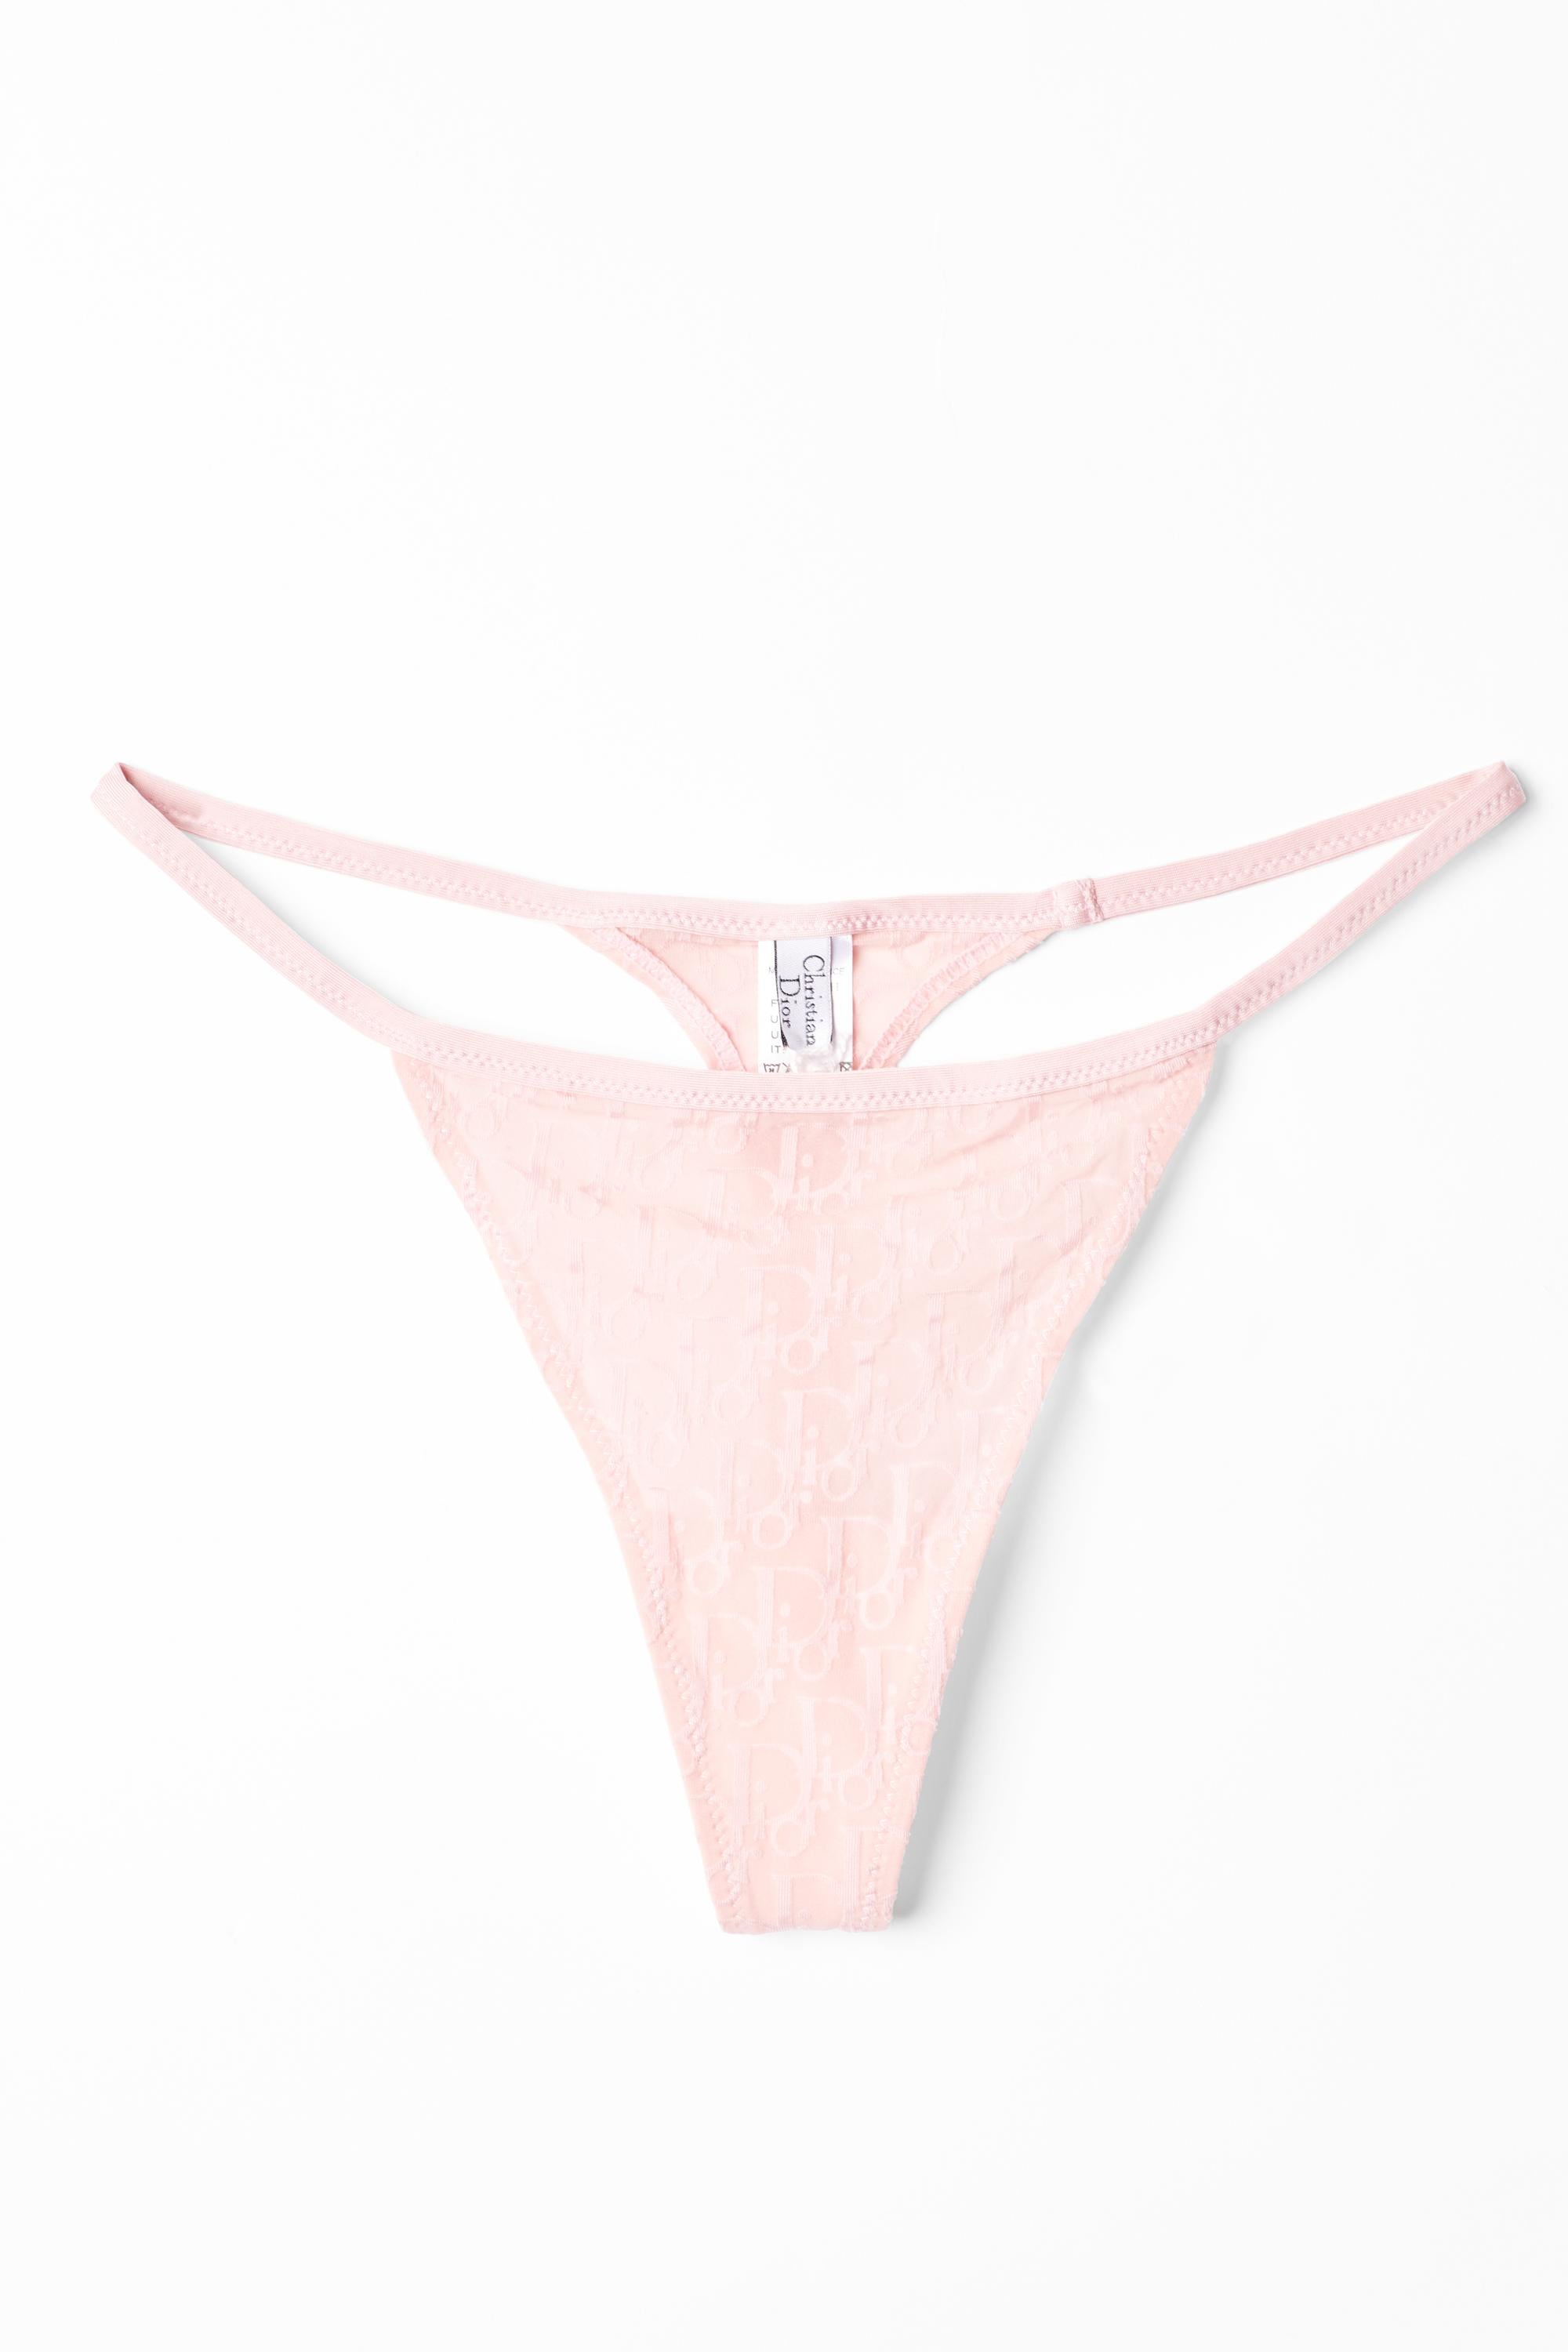 Christian Dior  Vintage S/S 2003 Dior Pink Mesh Monogram Thong In New Condition For Sale In London, GB